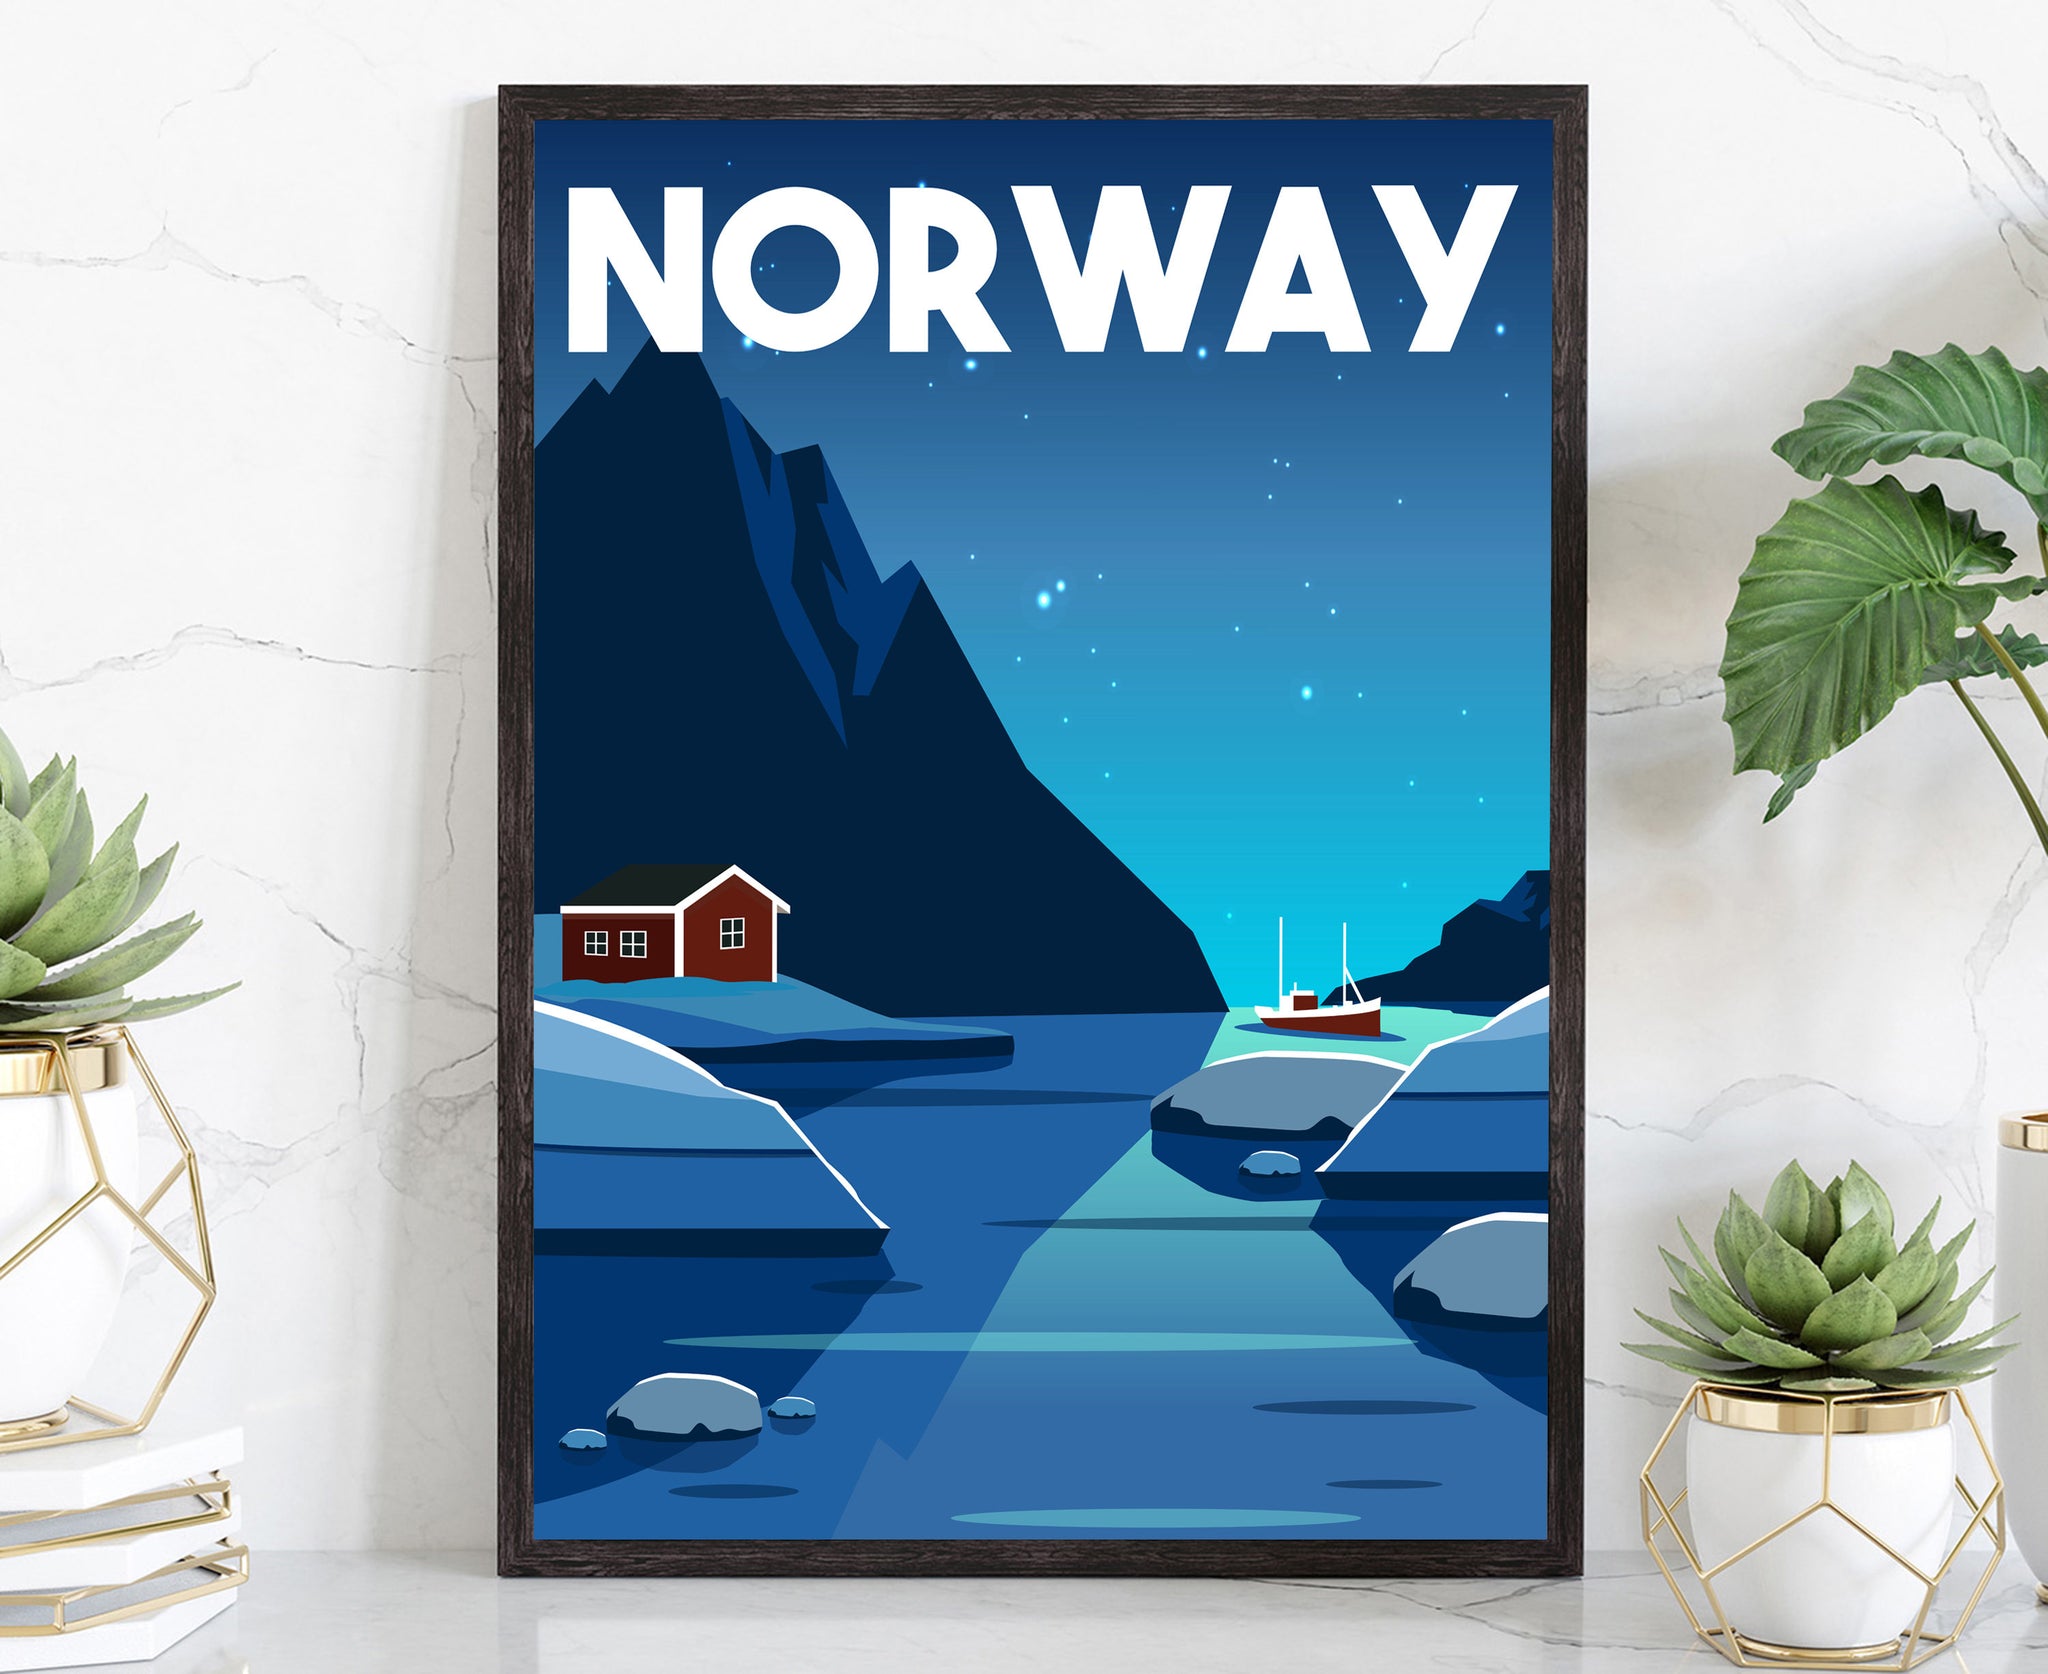 NORWAY TRAVEL POSTER, Norway Cityscape and Landmark Poster Wall Art, Home Wall Art, Office Wall Decor